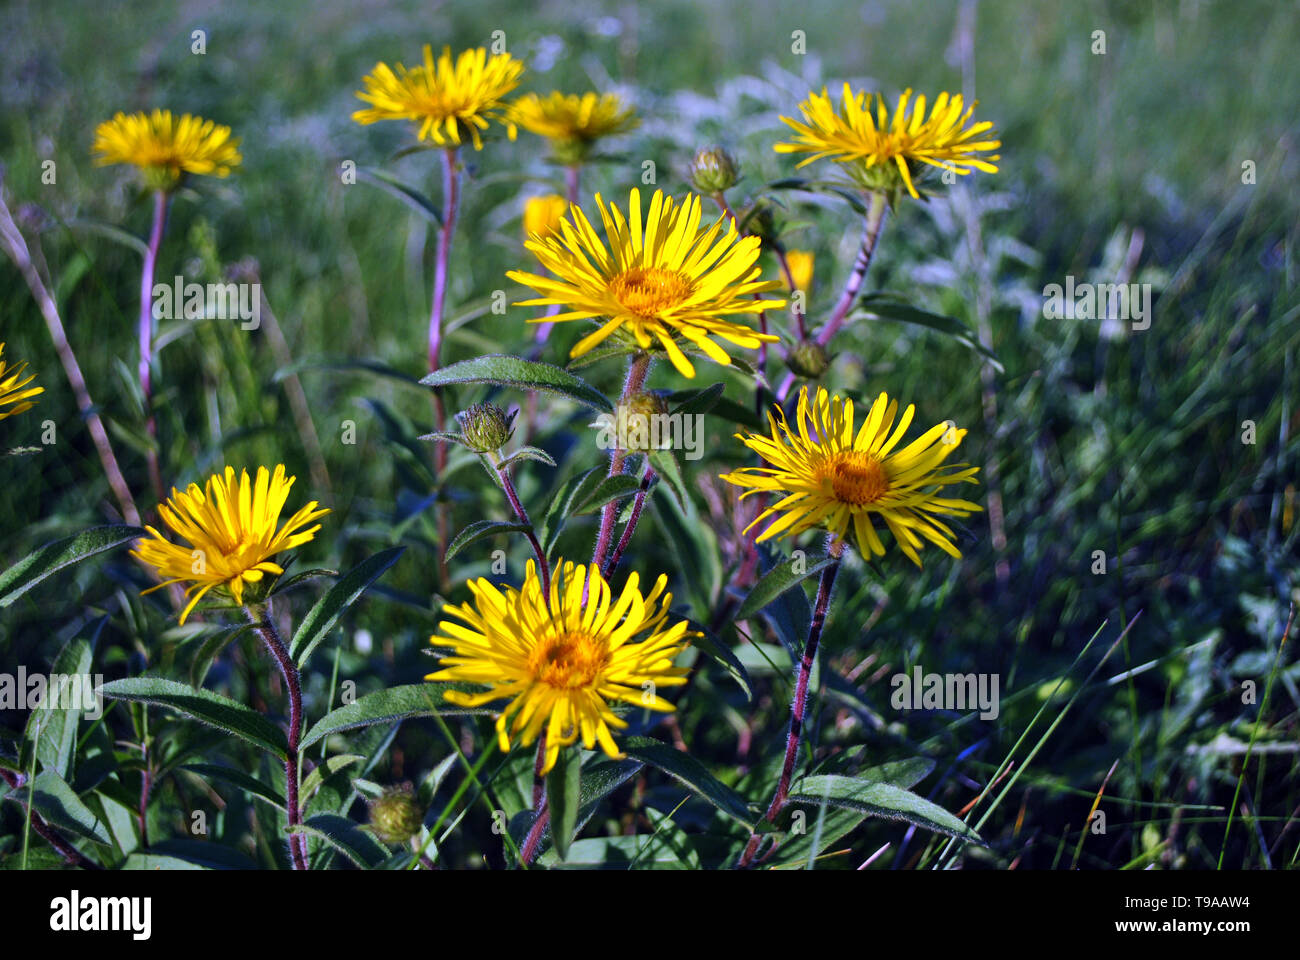 Doronicum plantagineum (the plantain-leaved leopard's-bane or plantain false leopardbane) blooming flowers on blurry grass background Stock Photo